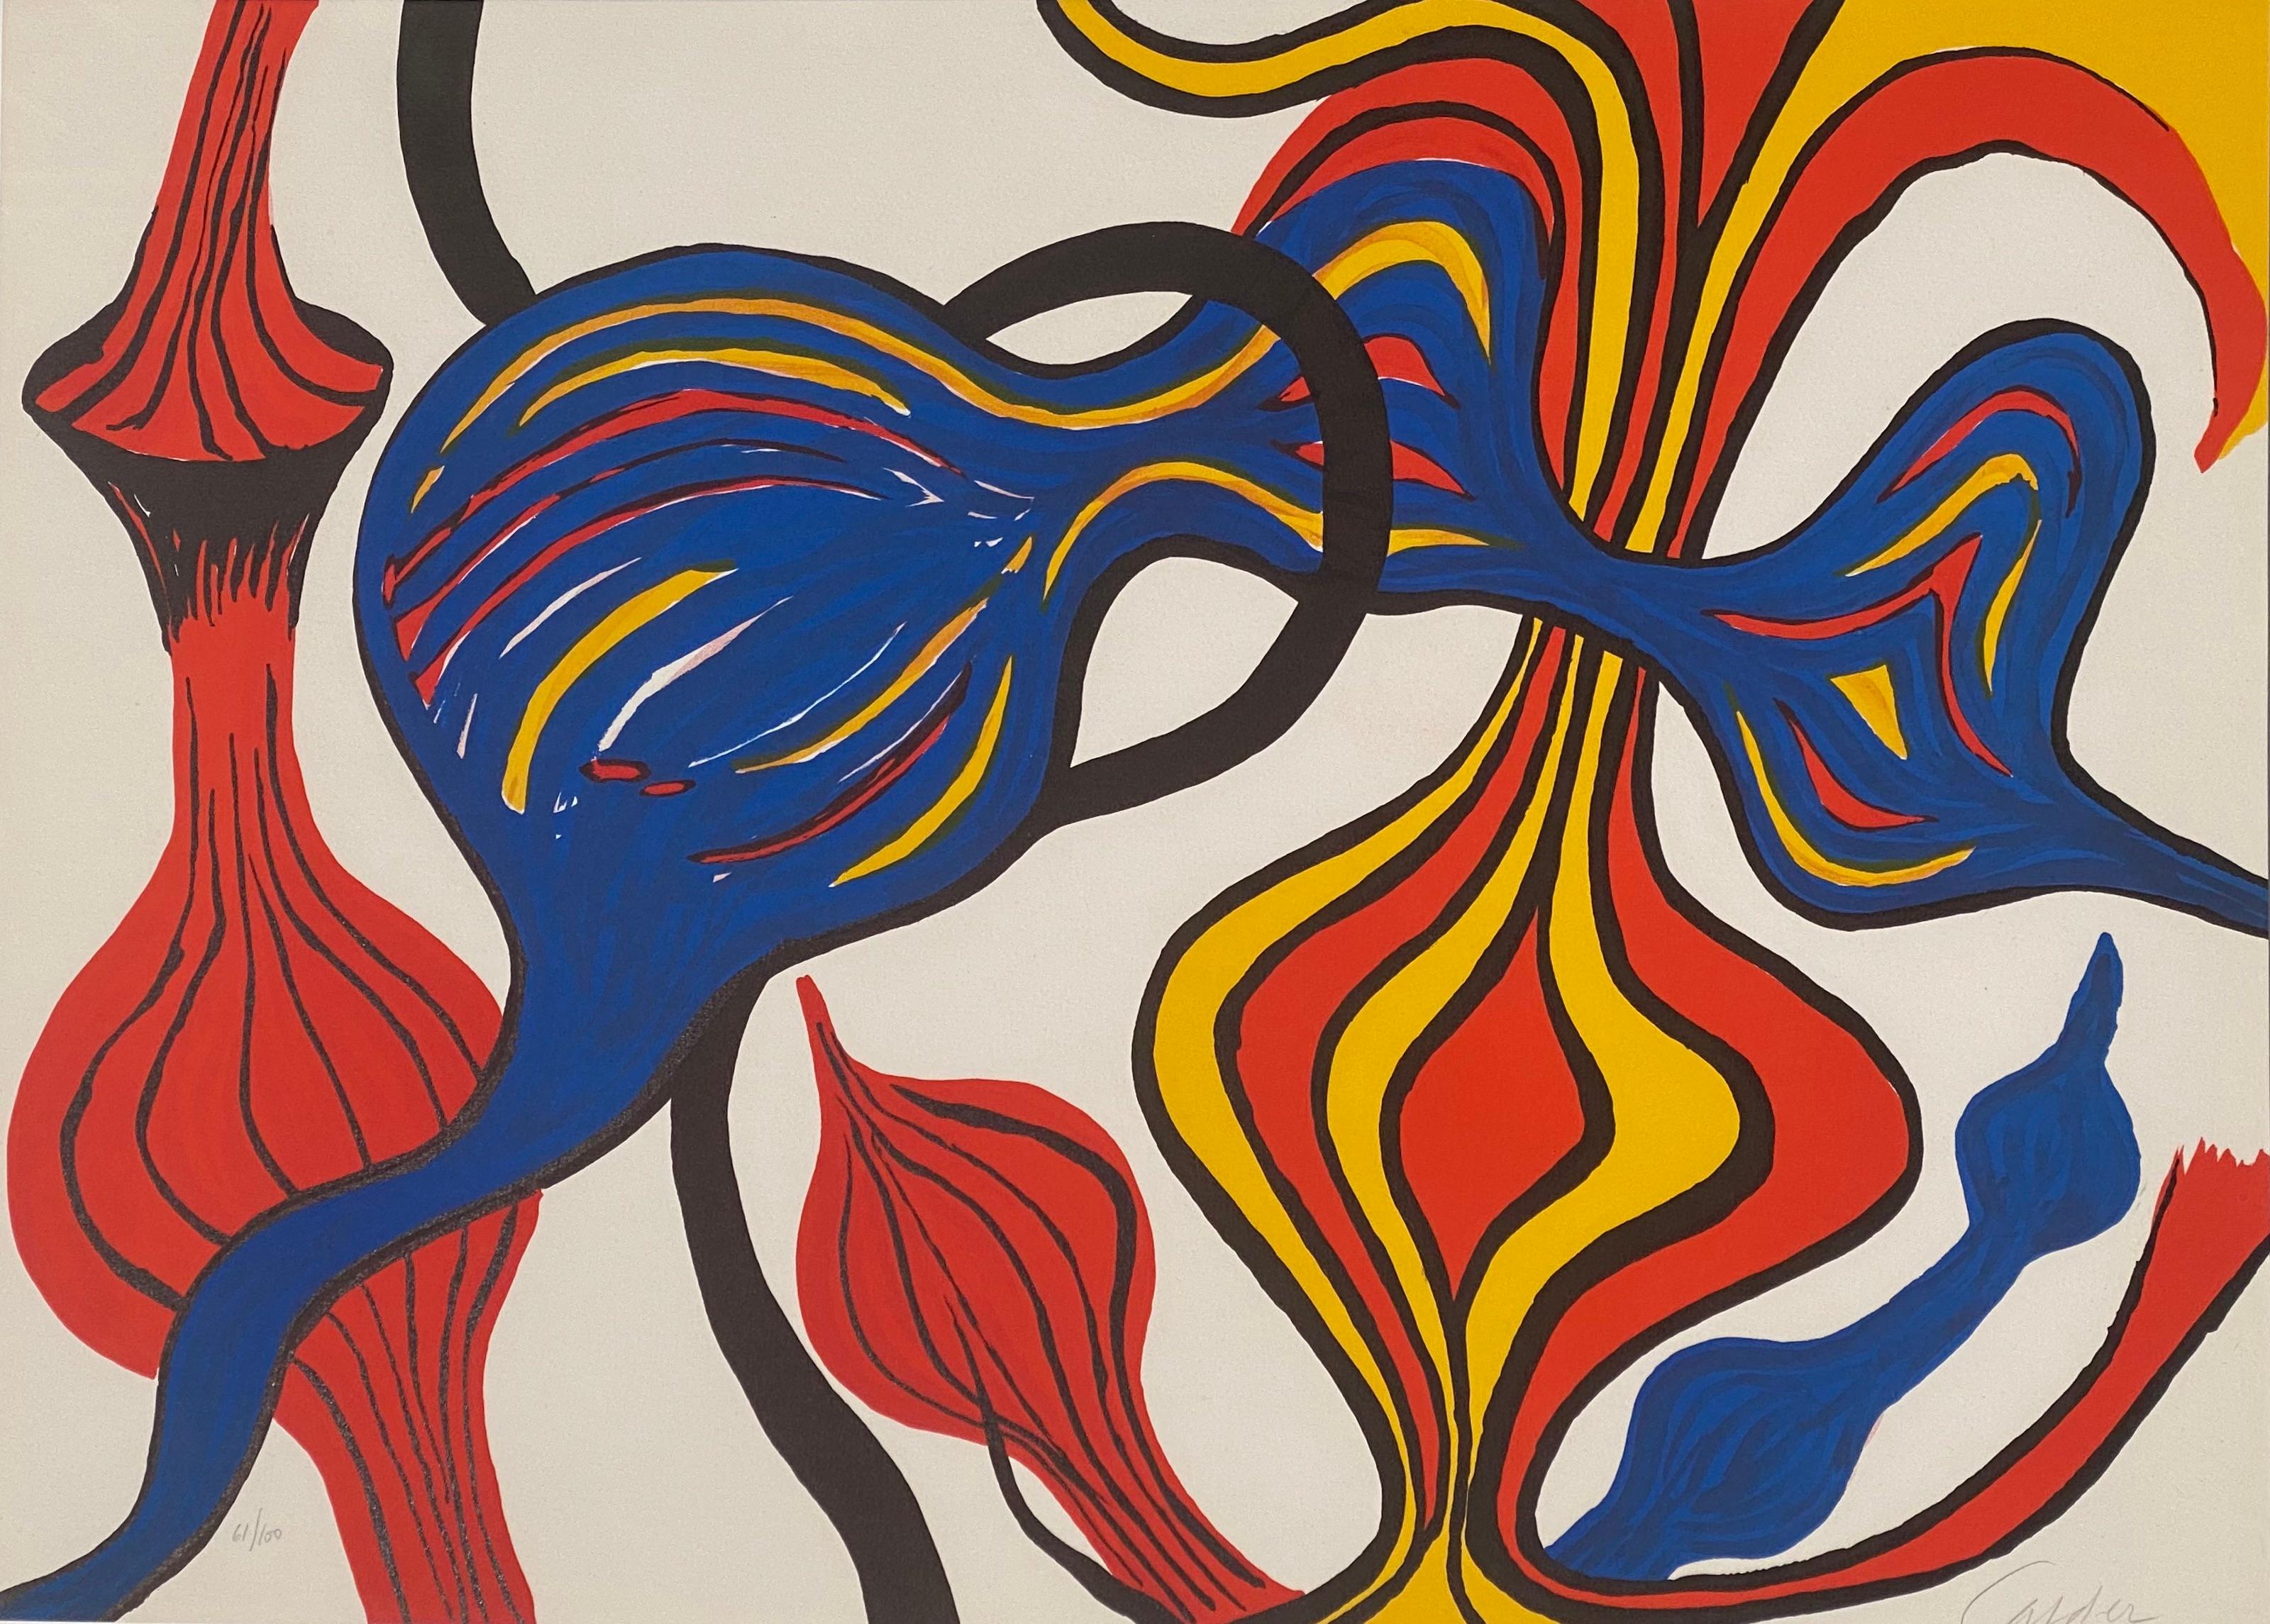 Galactic Systems - Print by Alexander Calder